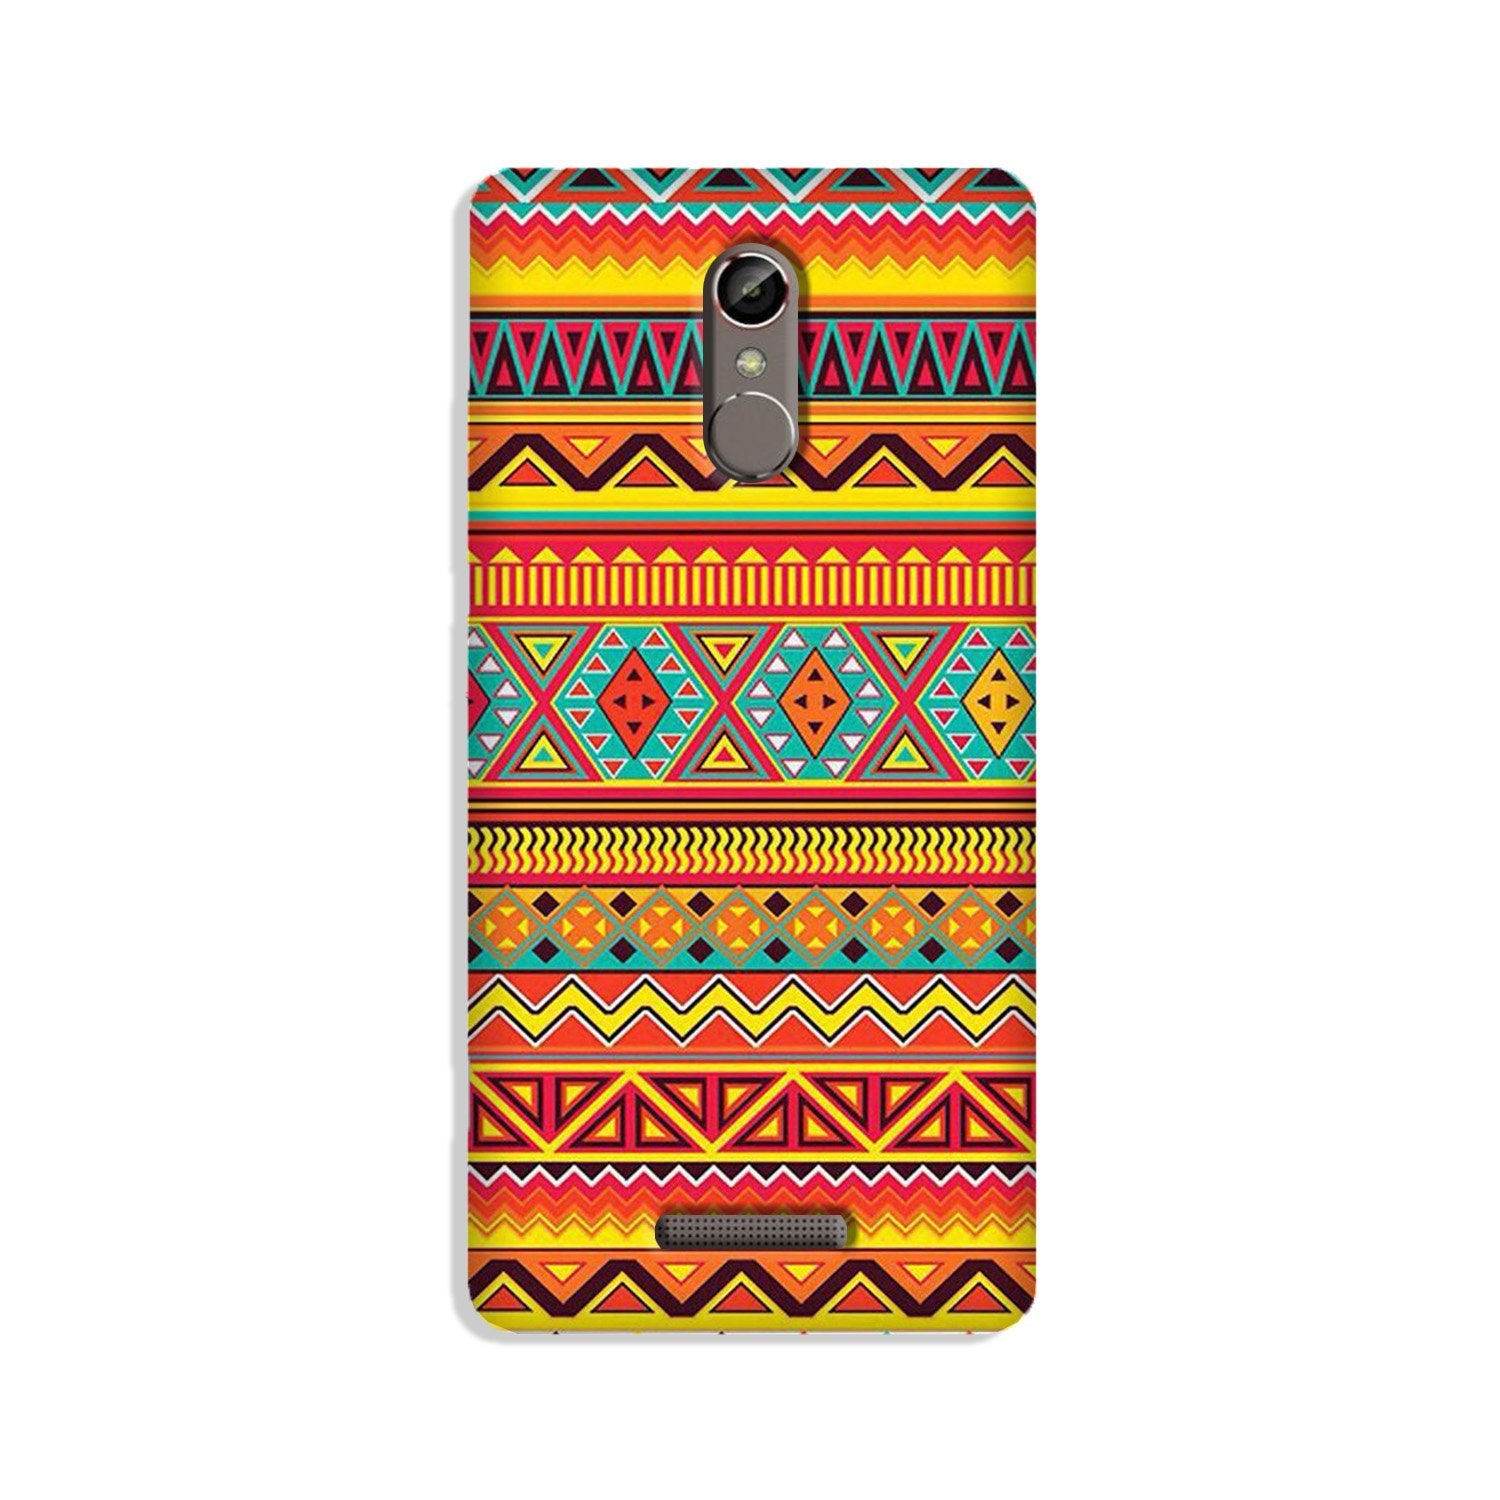 Zigzag line pattern Case for Gionee S6s